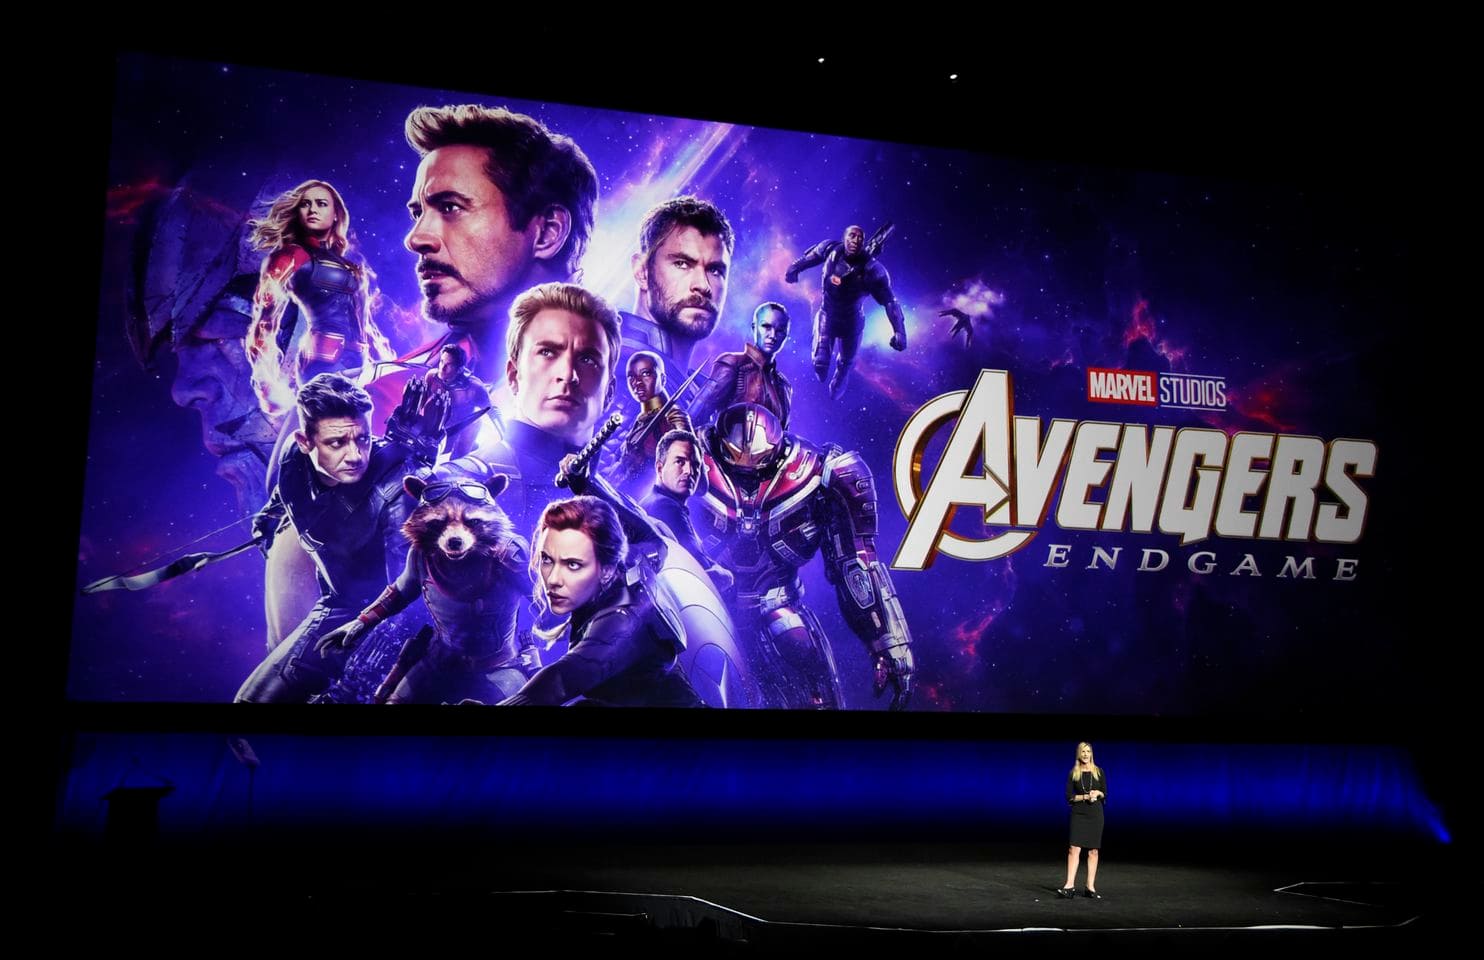 Avengers: Endgame Day 1 Collection, Movie Breaks Records Overseas